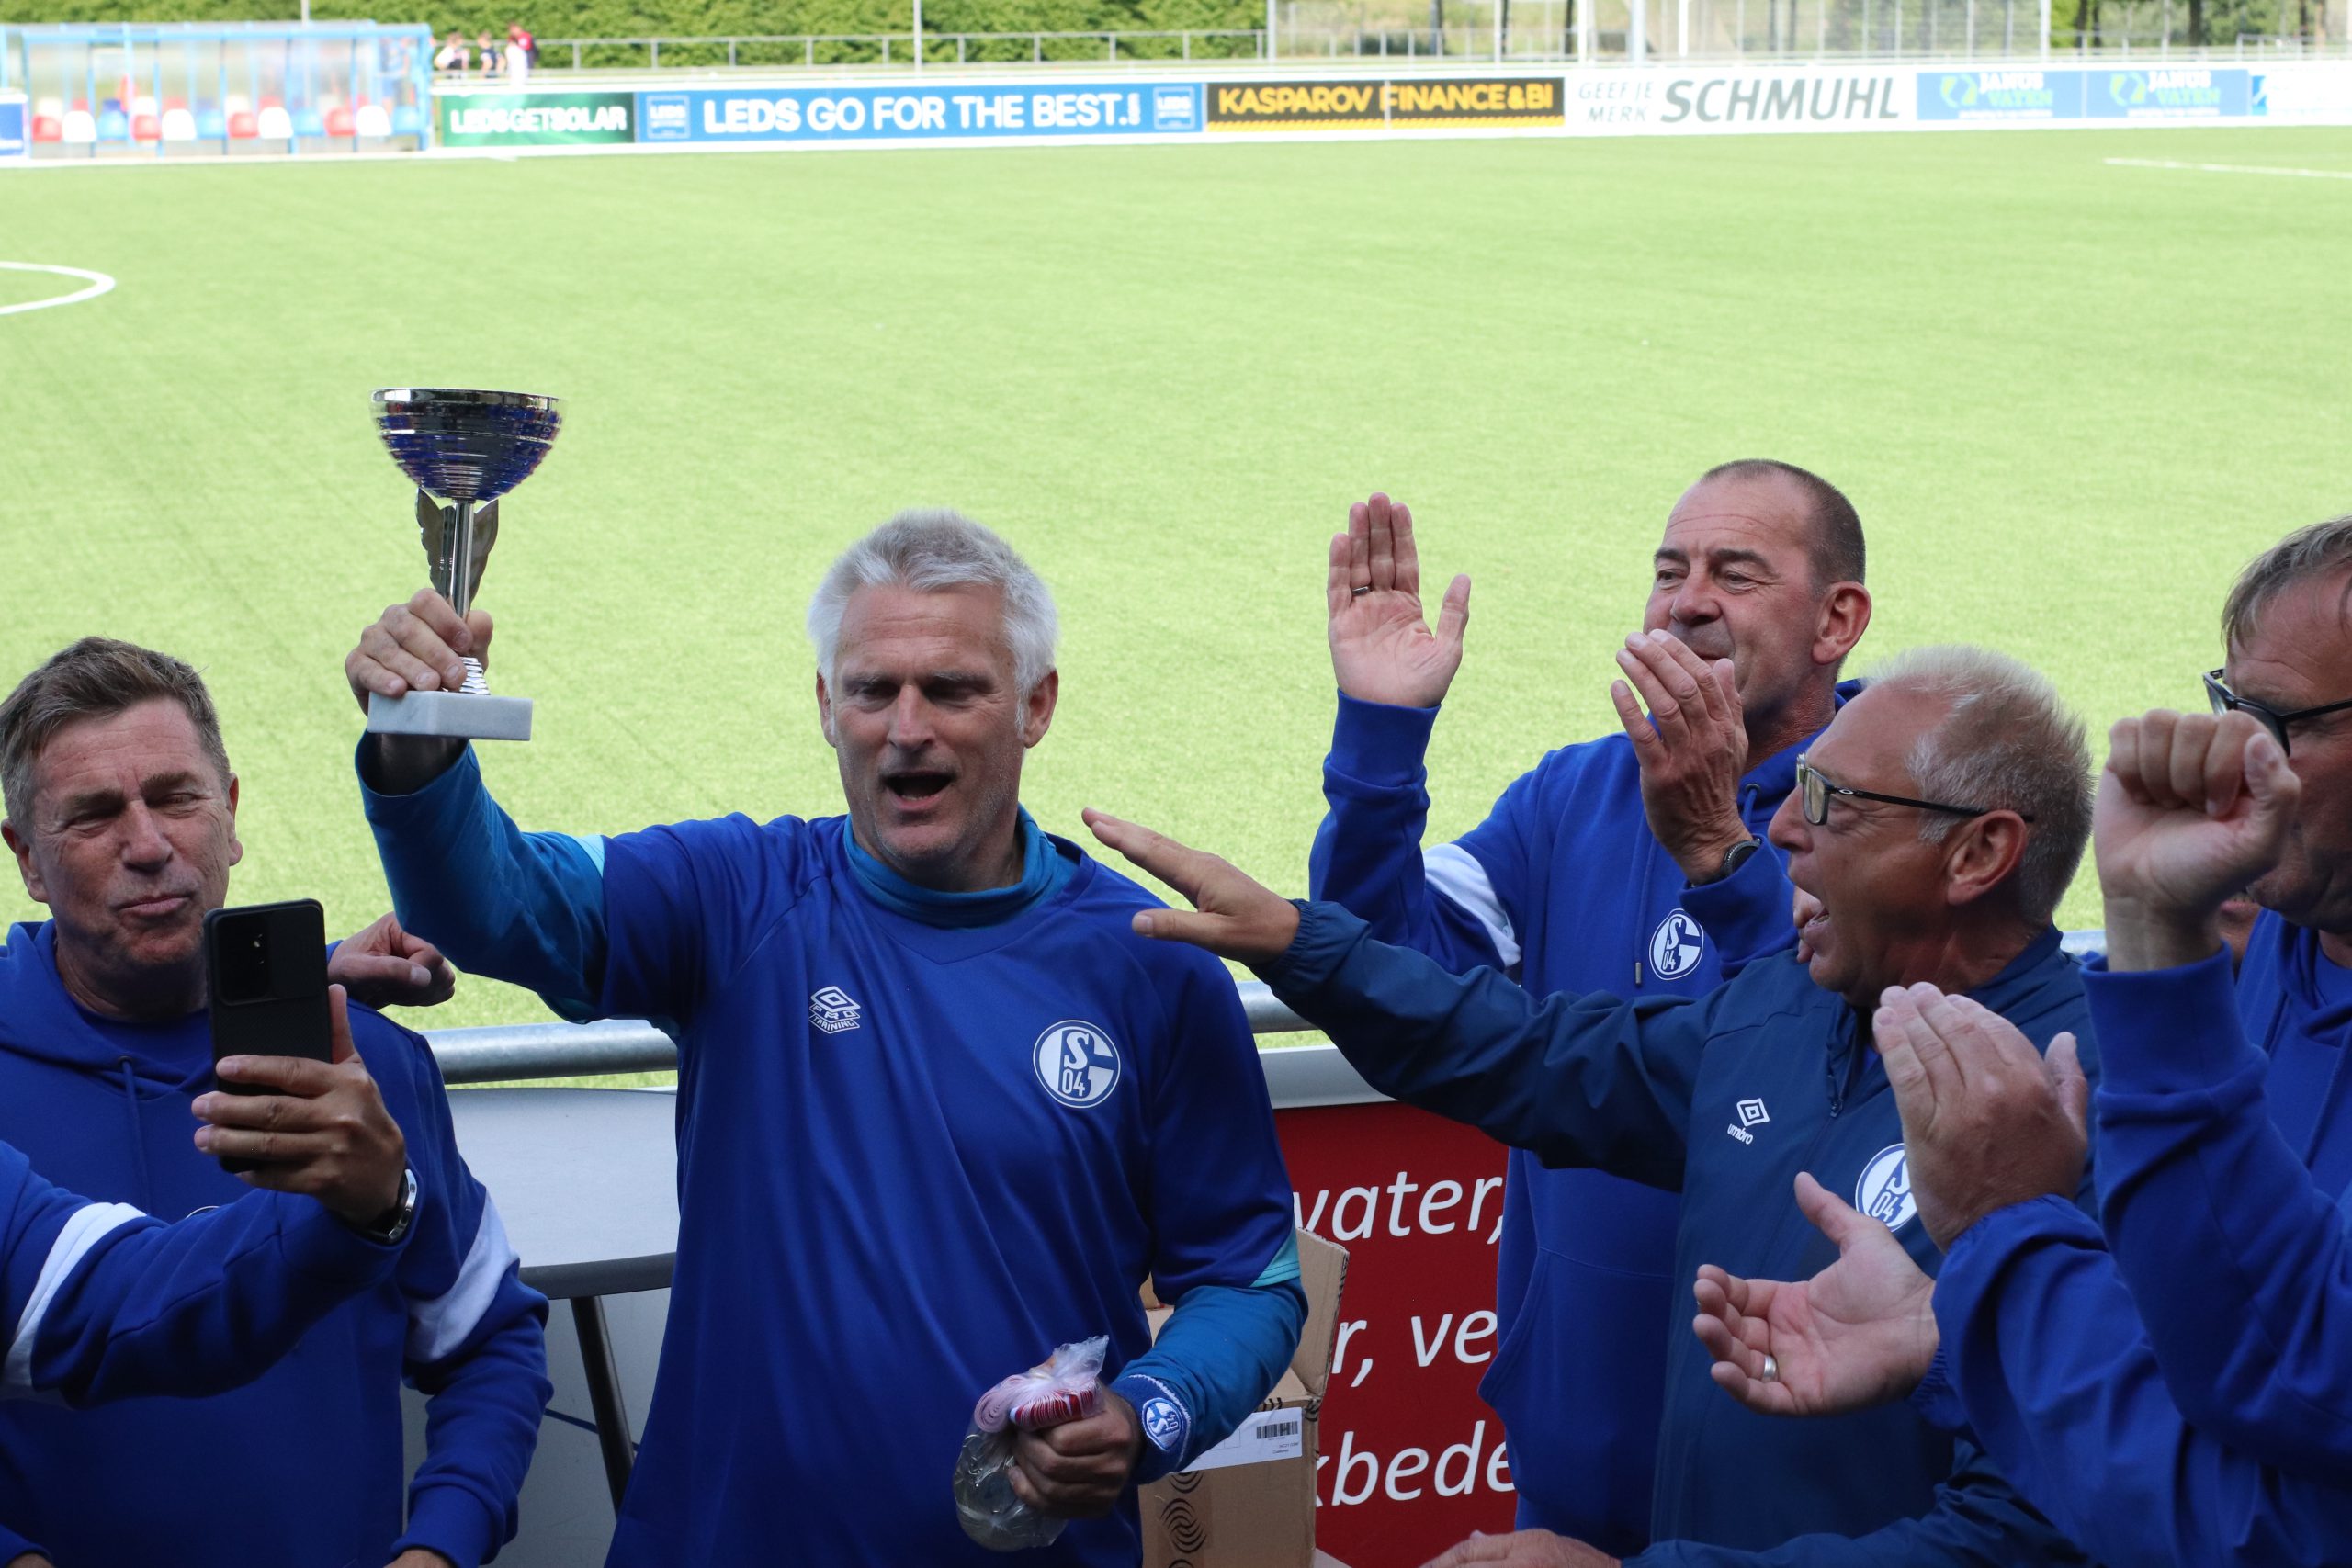 The first European Walking Football tournament hosts 16 teams in